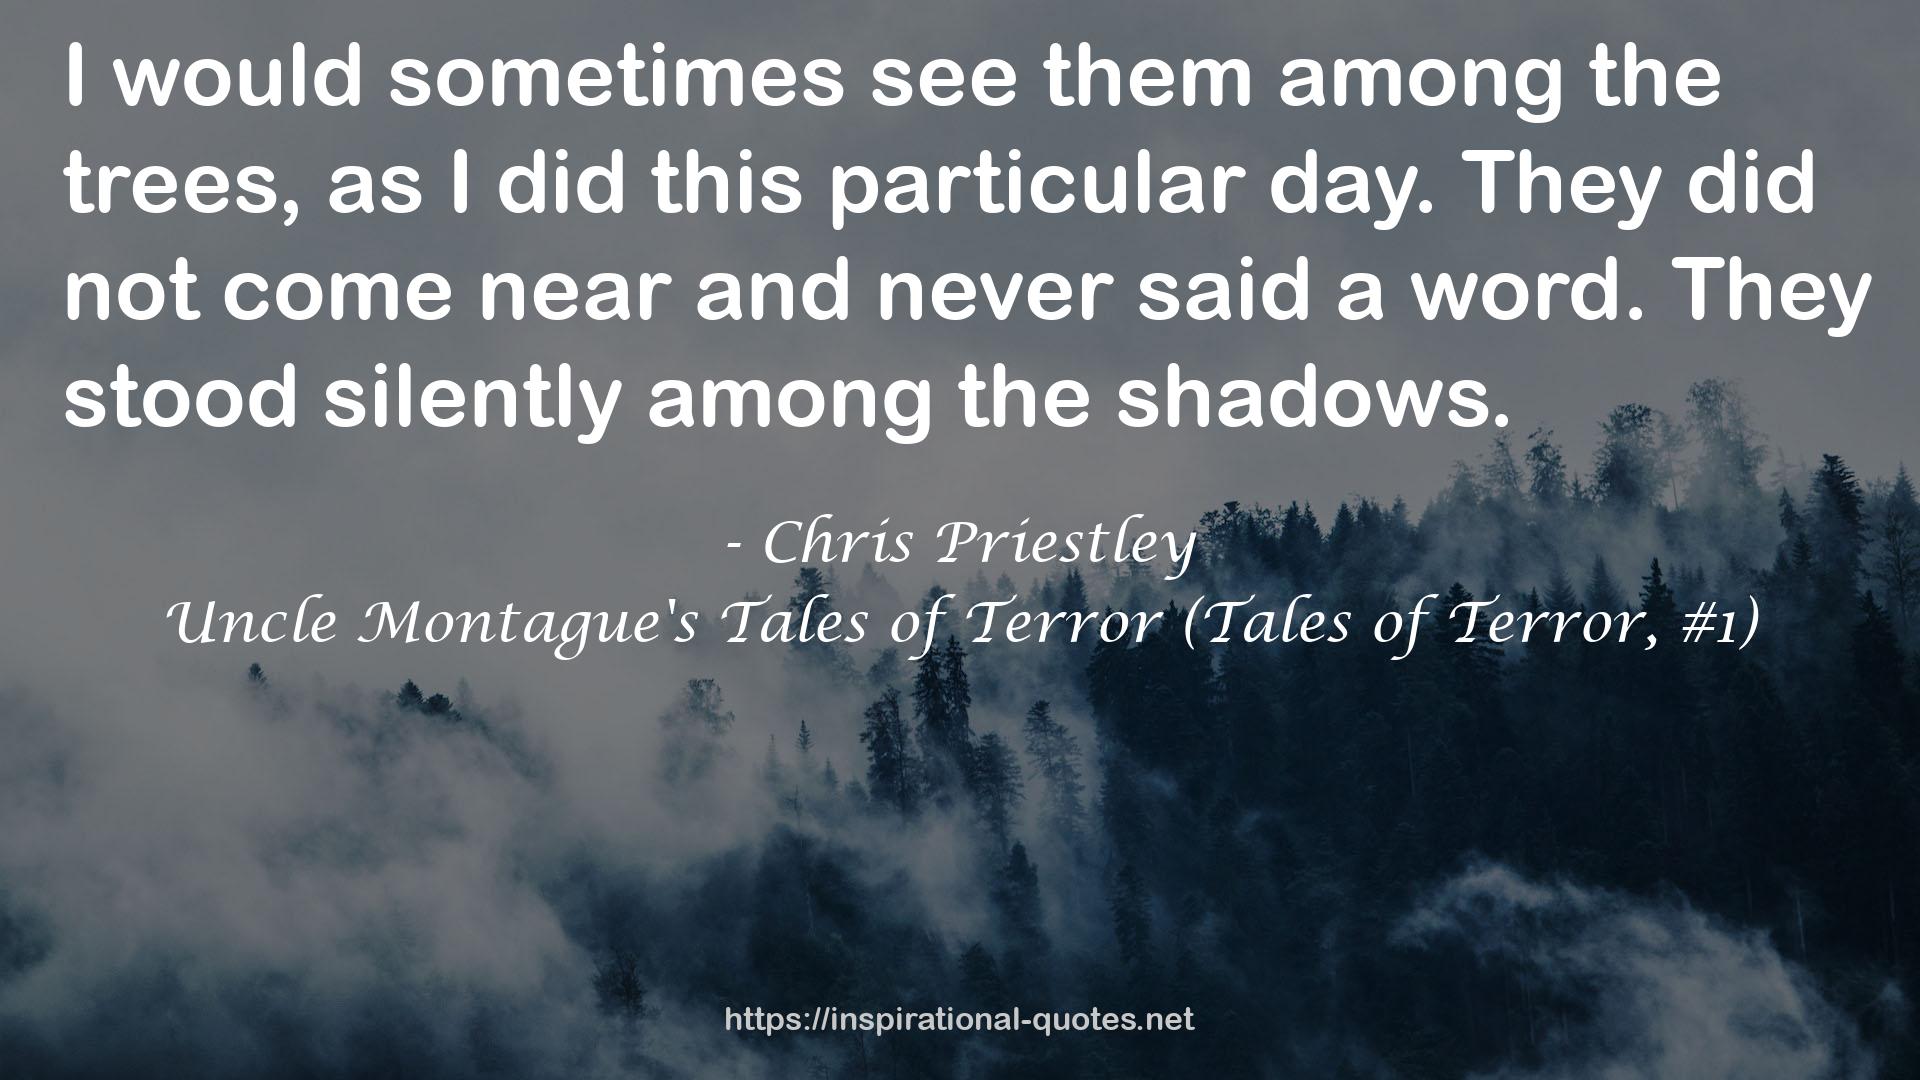 Uncle Montague's Tales of Terror (Tales of Terror, #1) QUOTES